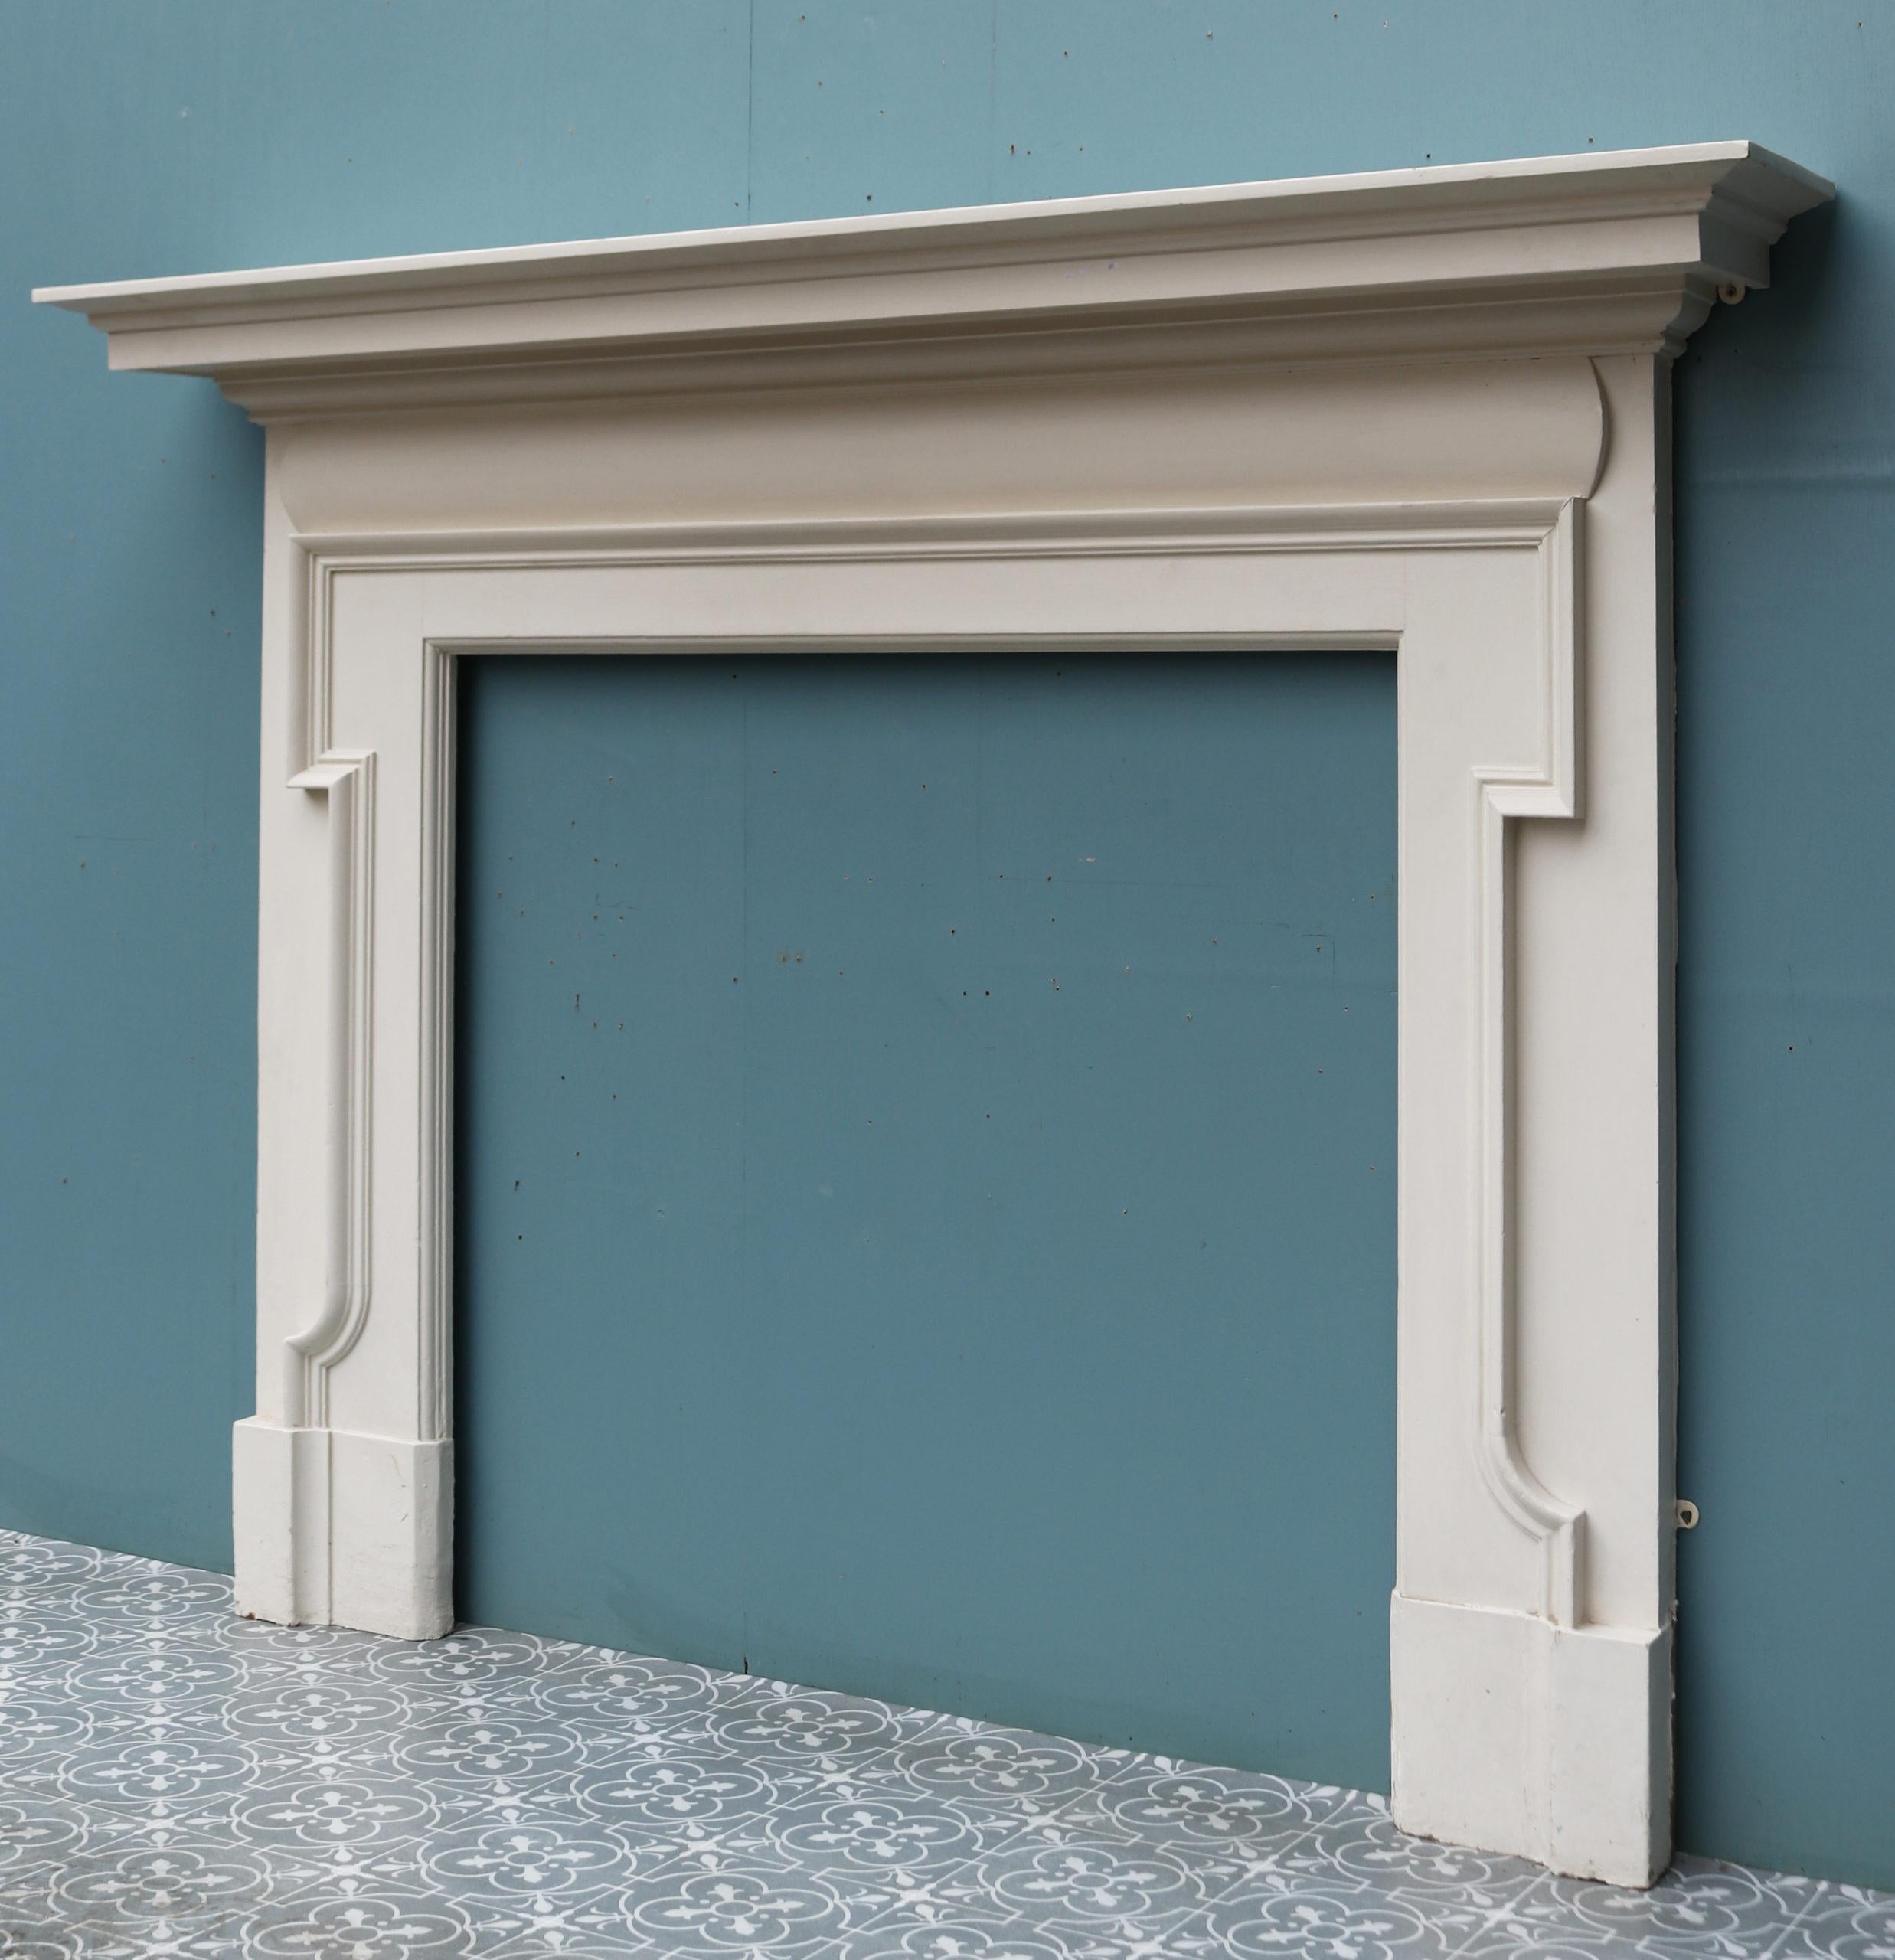 English Reclaimed Painted Antique Fire Mantel For Sale